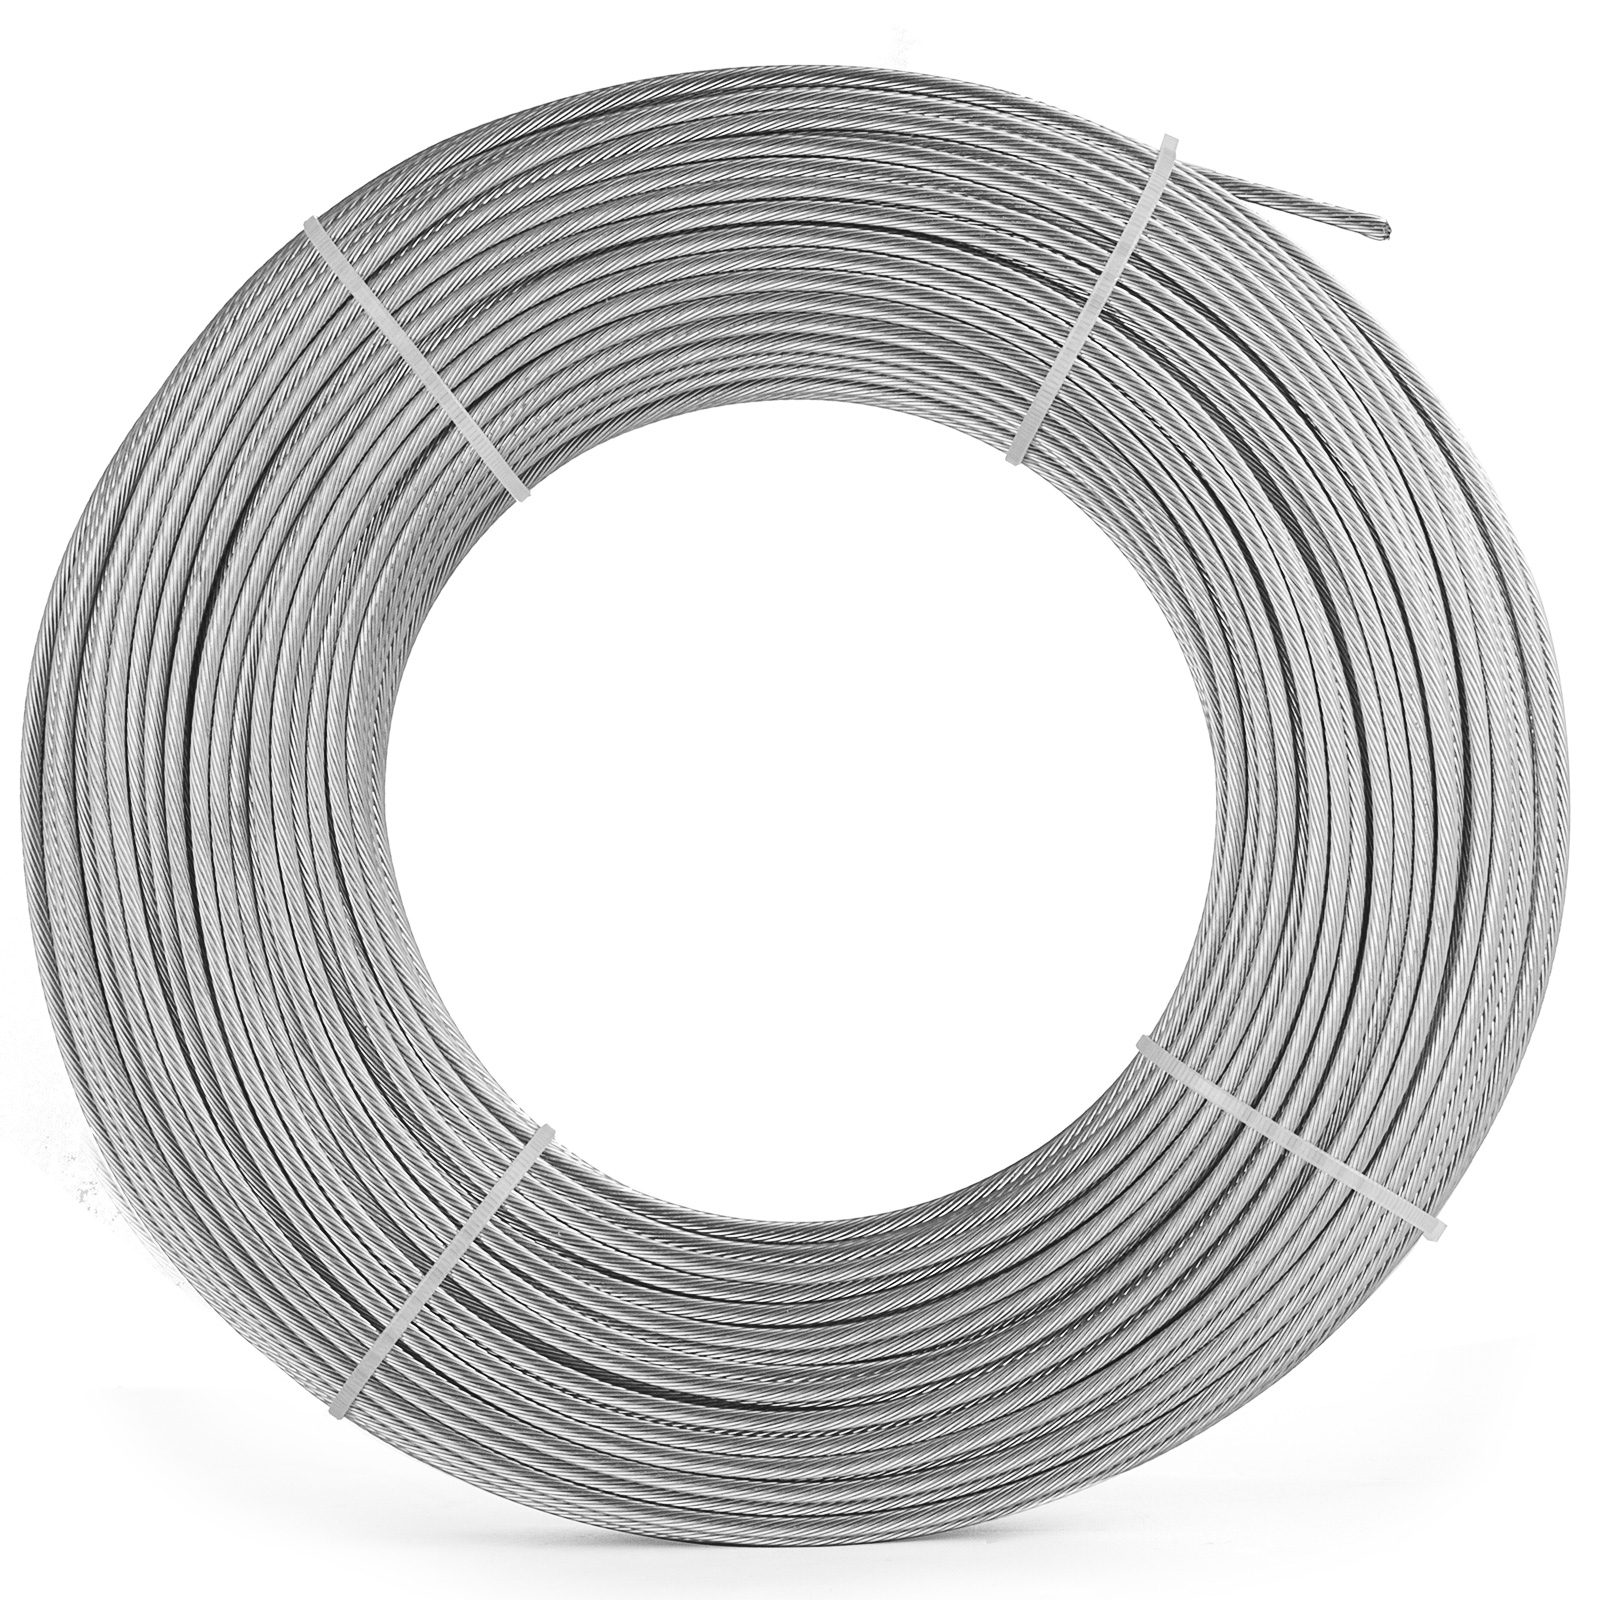 Stainless Steel Type 316 Wire Rope 7x7 100-1000FT Brand-new Outdoor Airline 